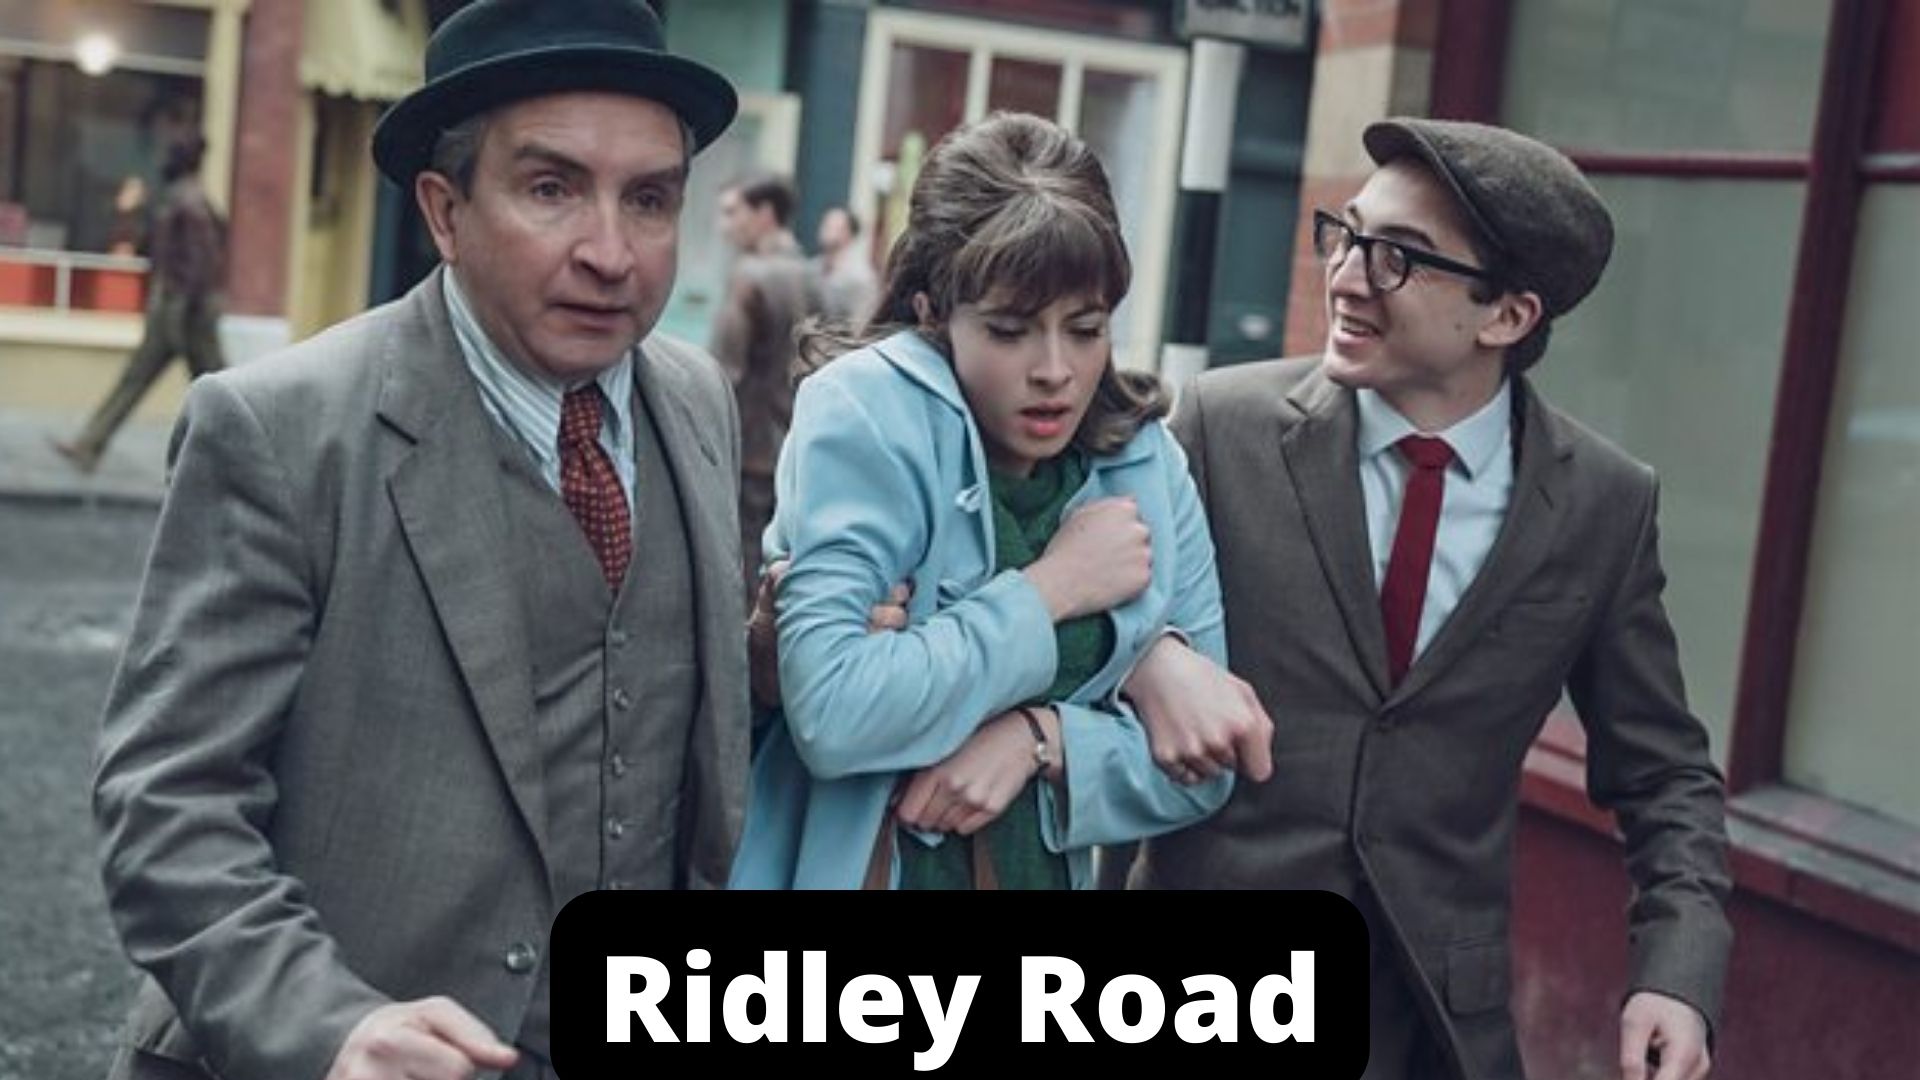 Ridley Road Parents guide and Age Rating | 2021